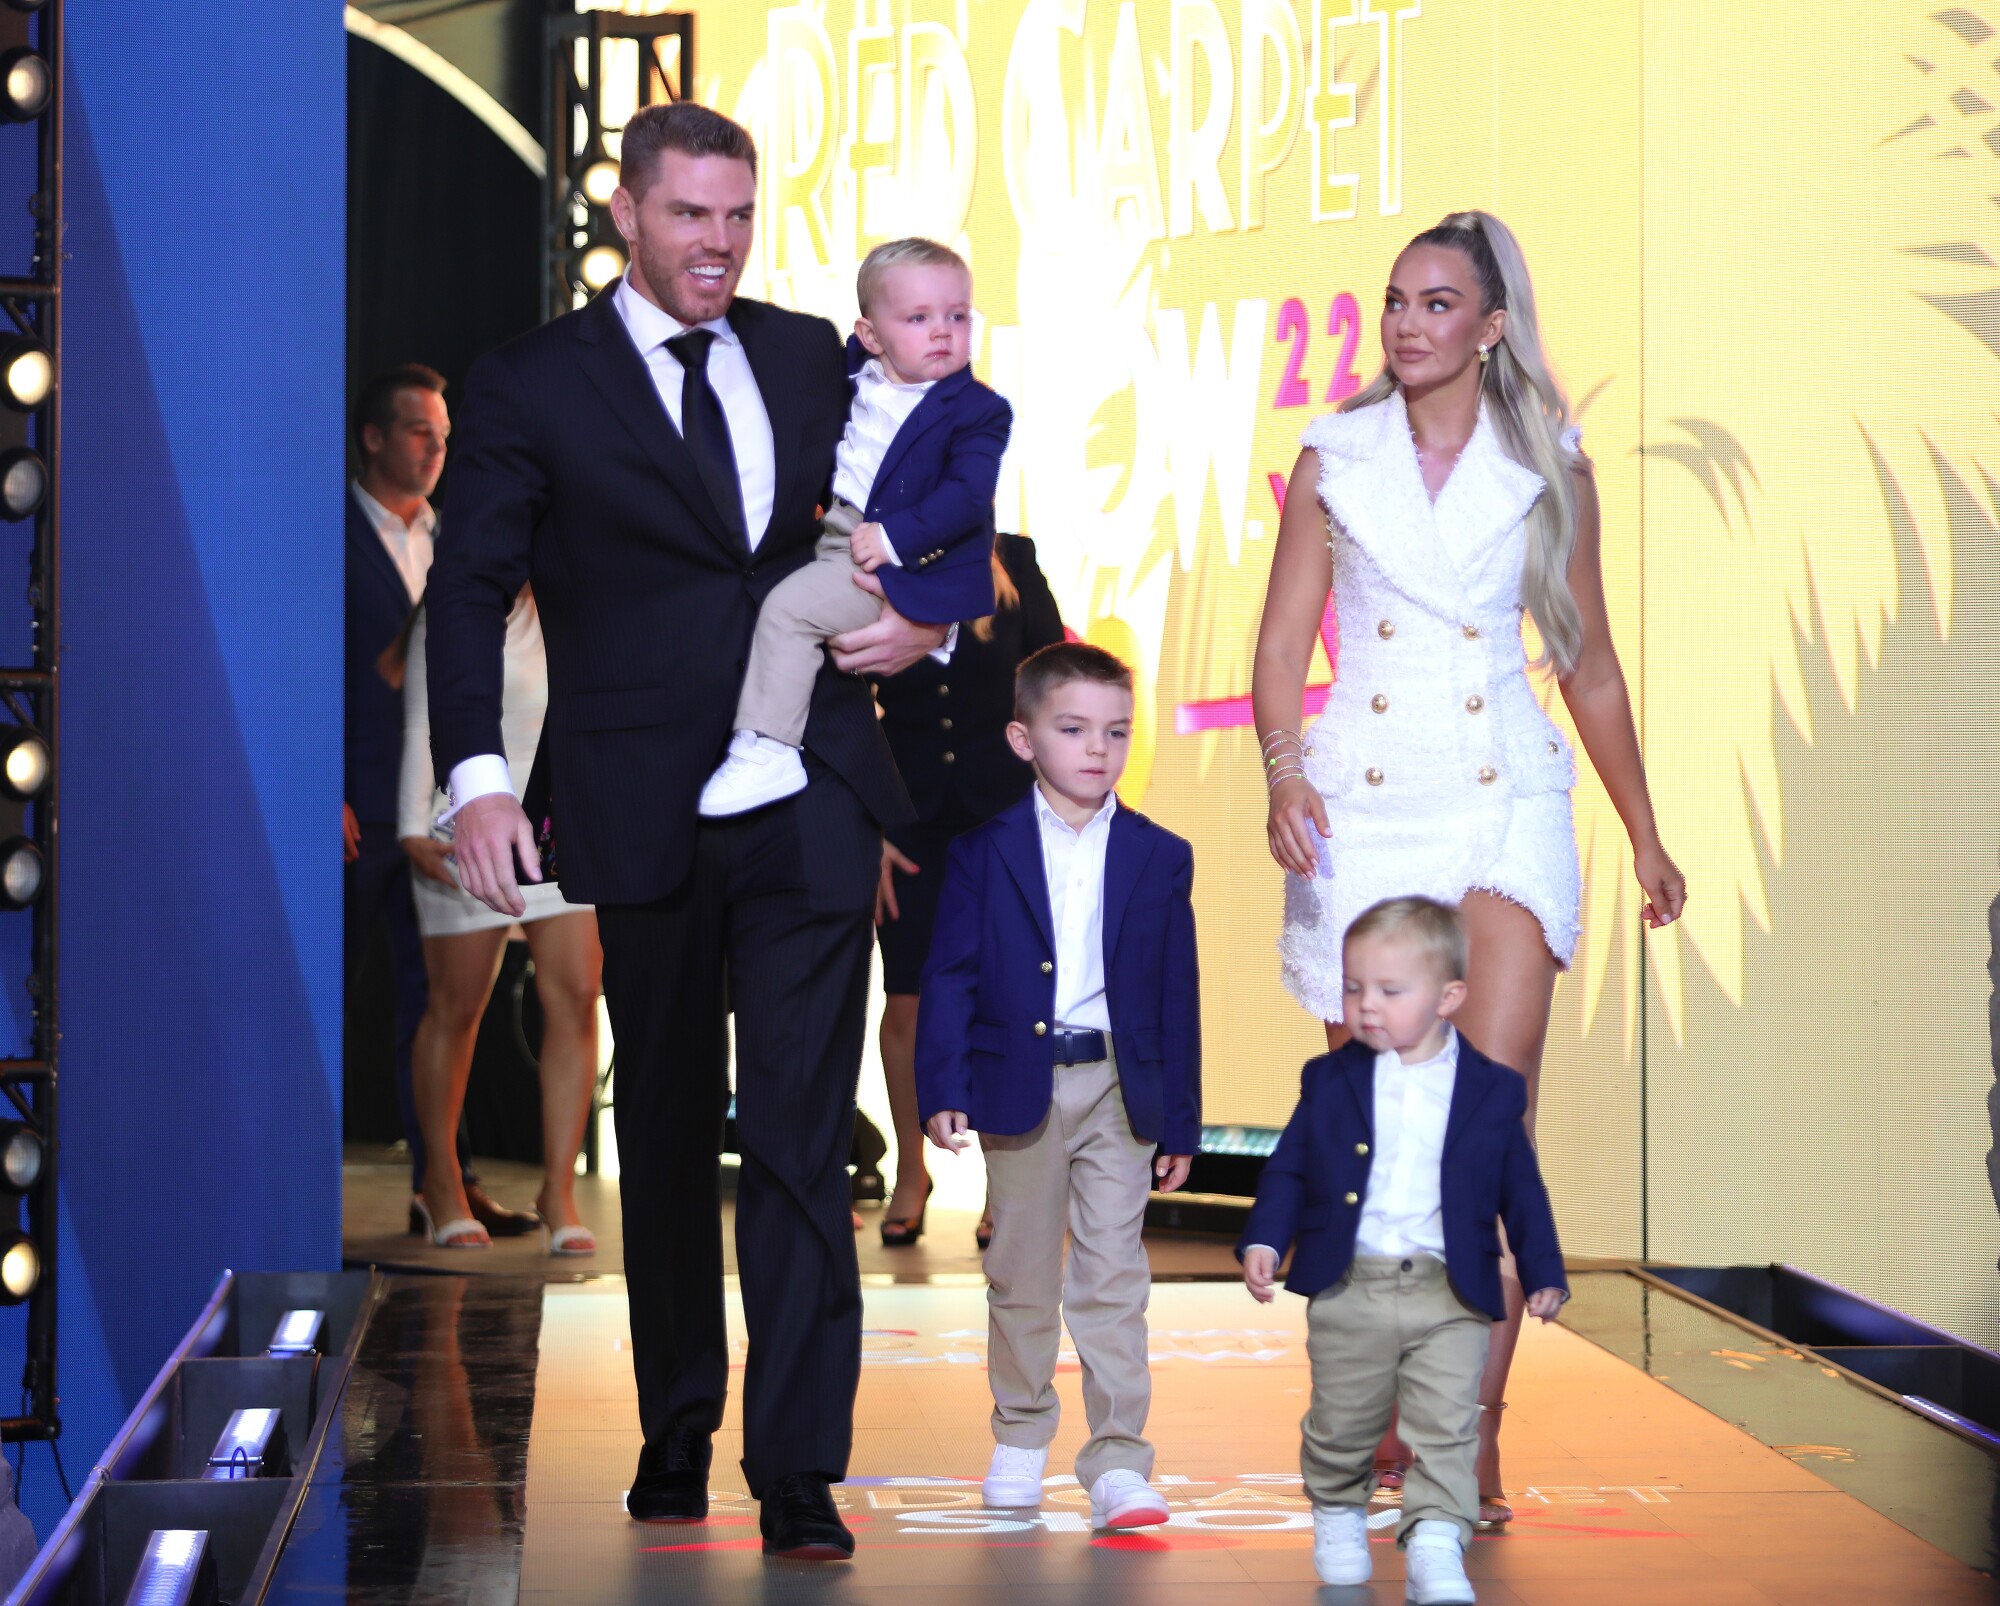 Dodgers first baseman Freddie Freeman arrives with his family on the red carpet of the 2022 MLB All-Star Game.